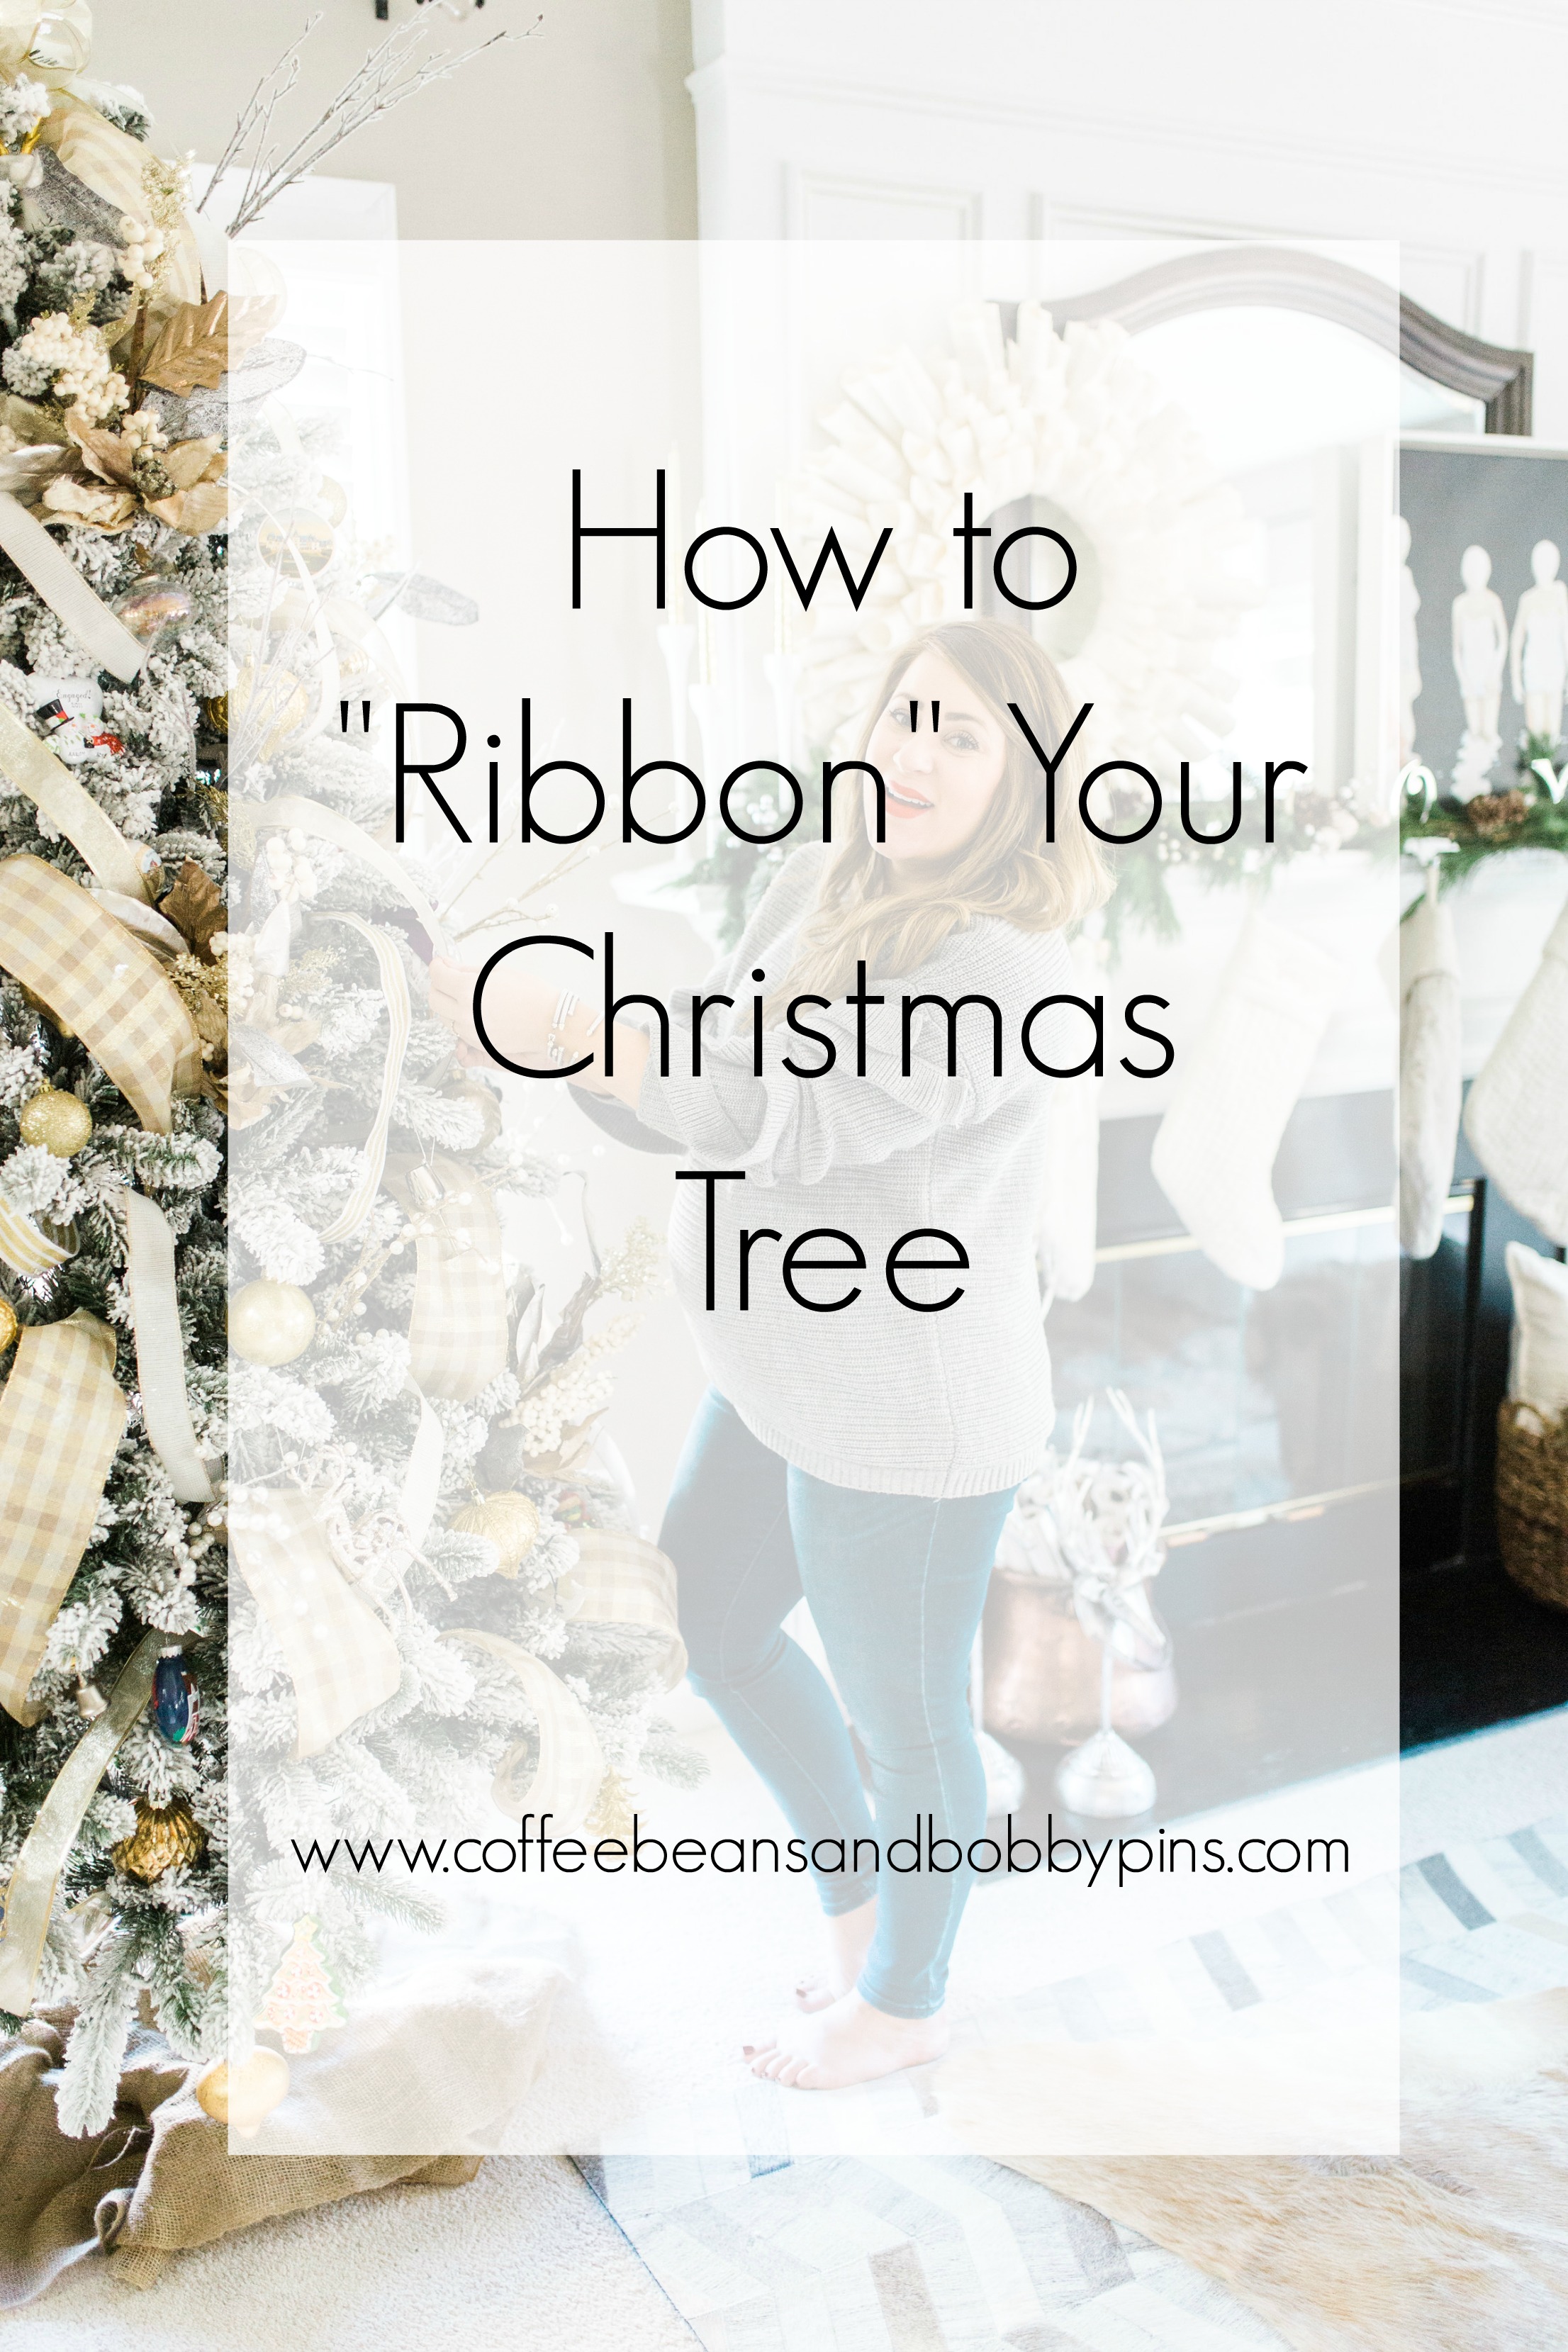 Christmas Tree Ribbons Tutorial by North Carolina style blogger Coffee Beans and Bobby Pins